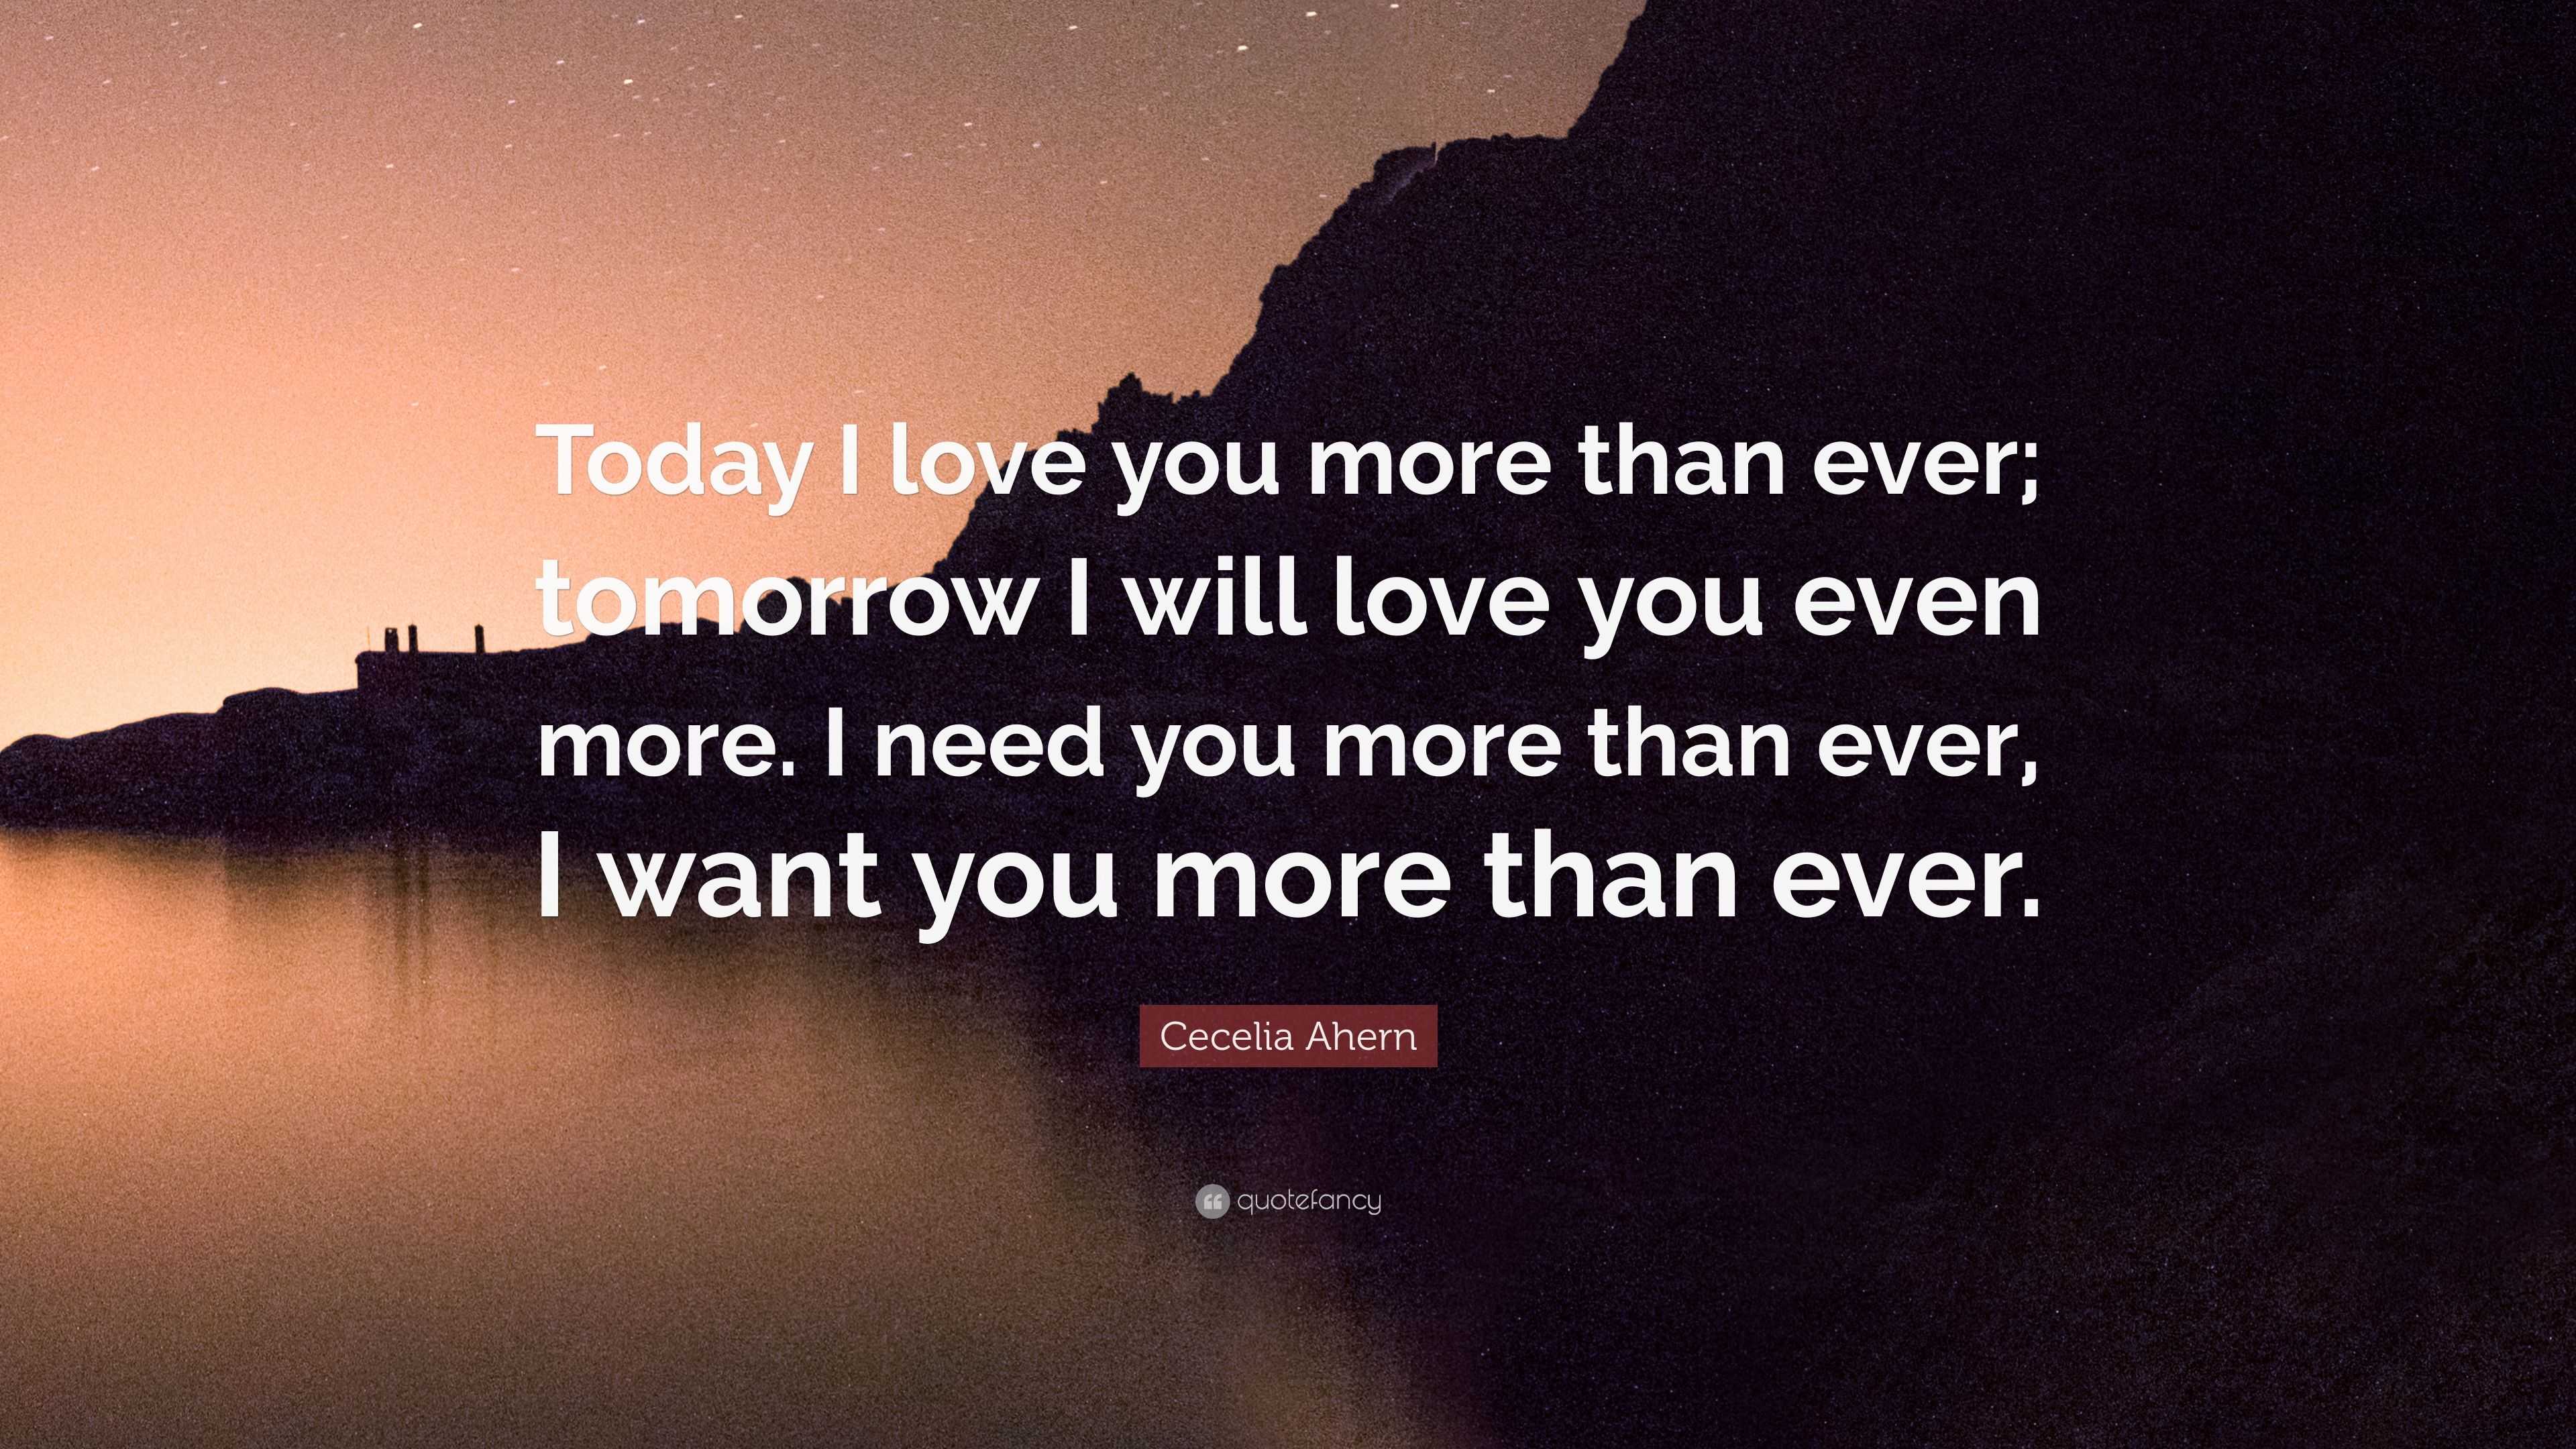 Cecelia Ahern Quote Today I Love You More Than Ever Tomorrow I Will Love You Even More I Need You More Than Ever I Want You More Than Eve